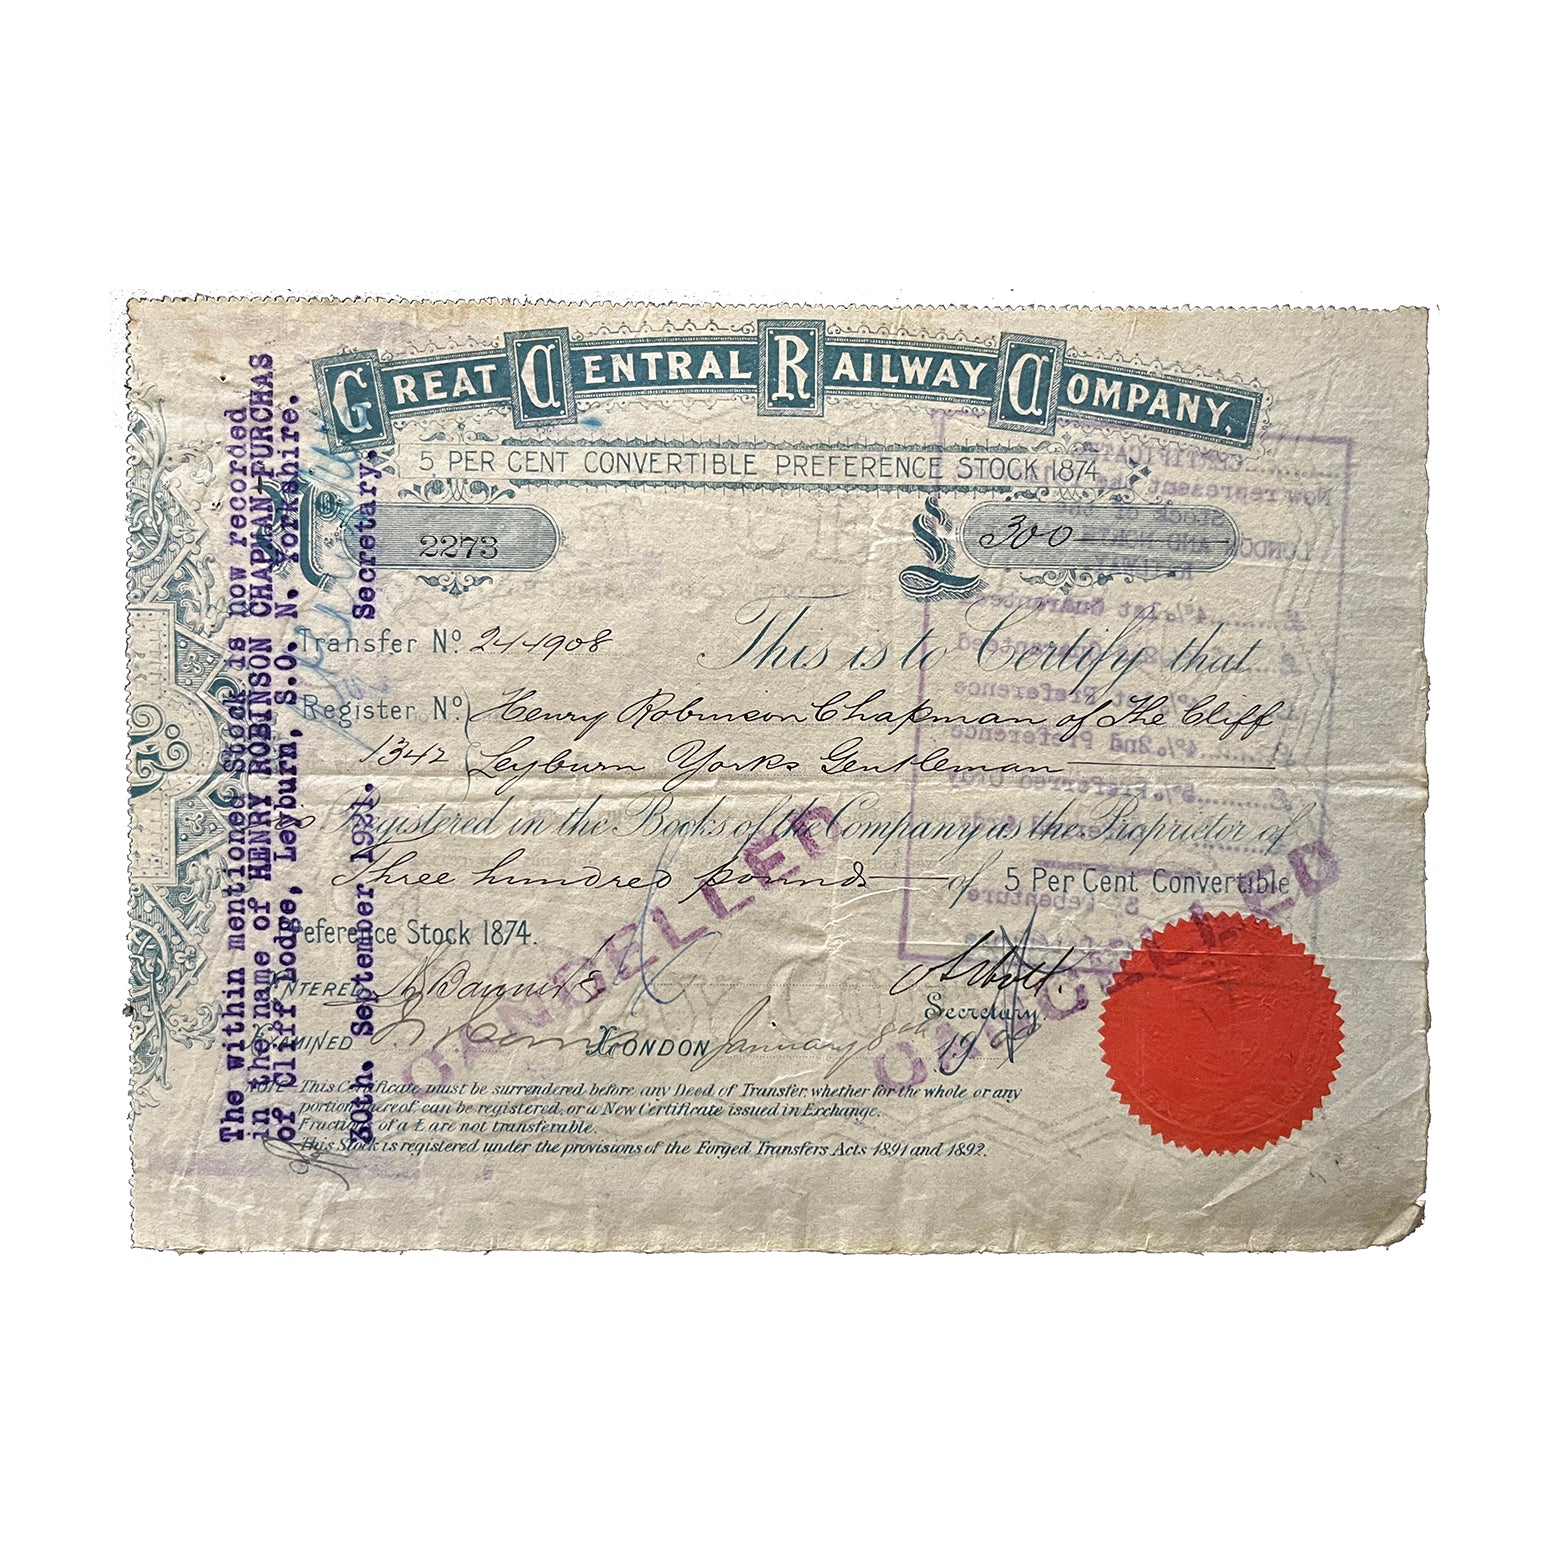 railway share certificate, Great Central Railway Company, 5% Convertible Preference Stock (1874), issued 1909. Transferred 1921